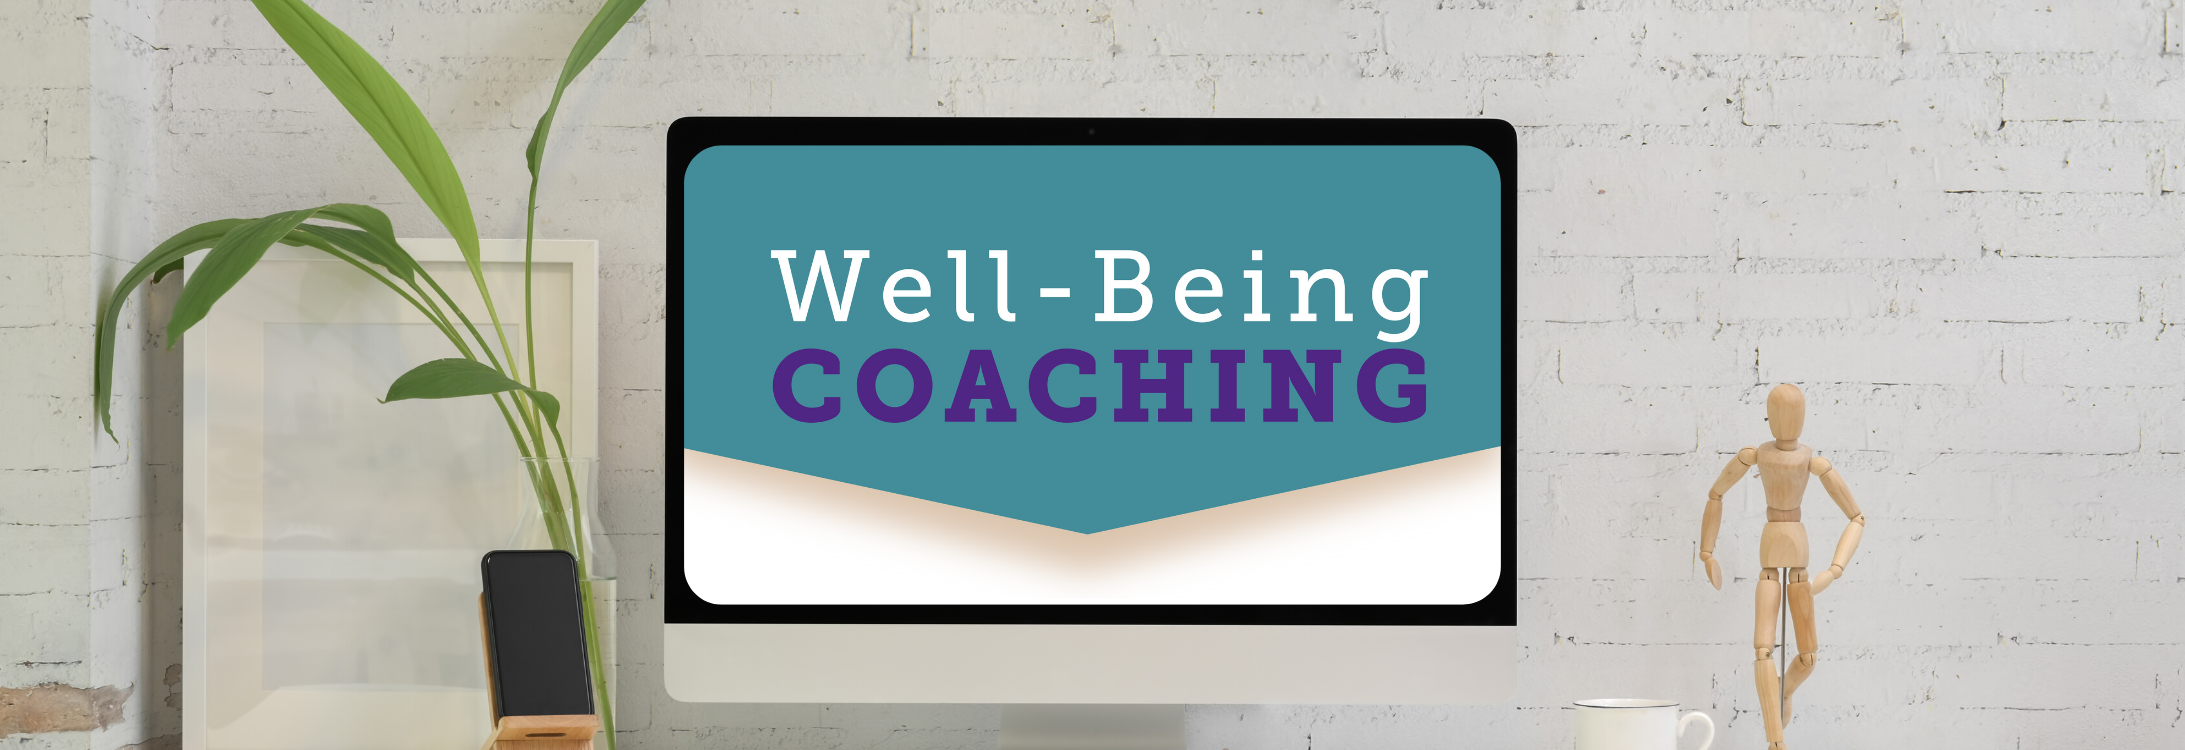 Well-Being Coaching blog cover